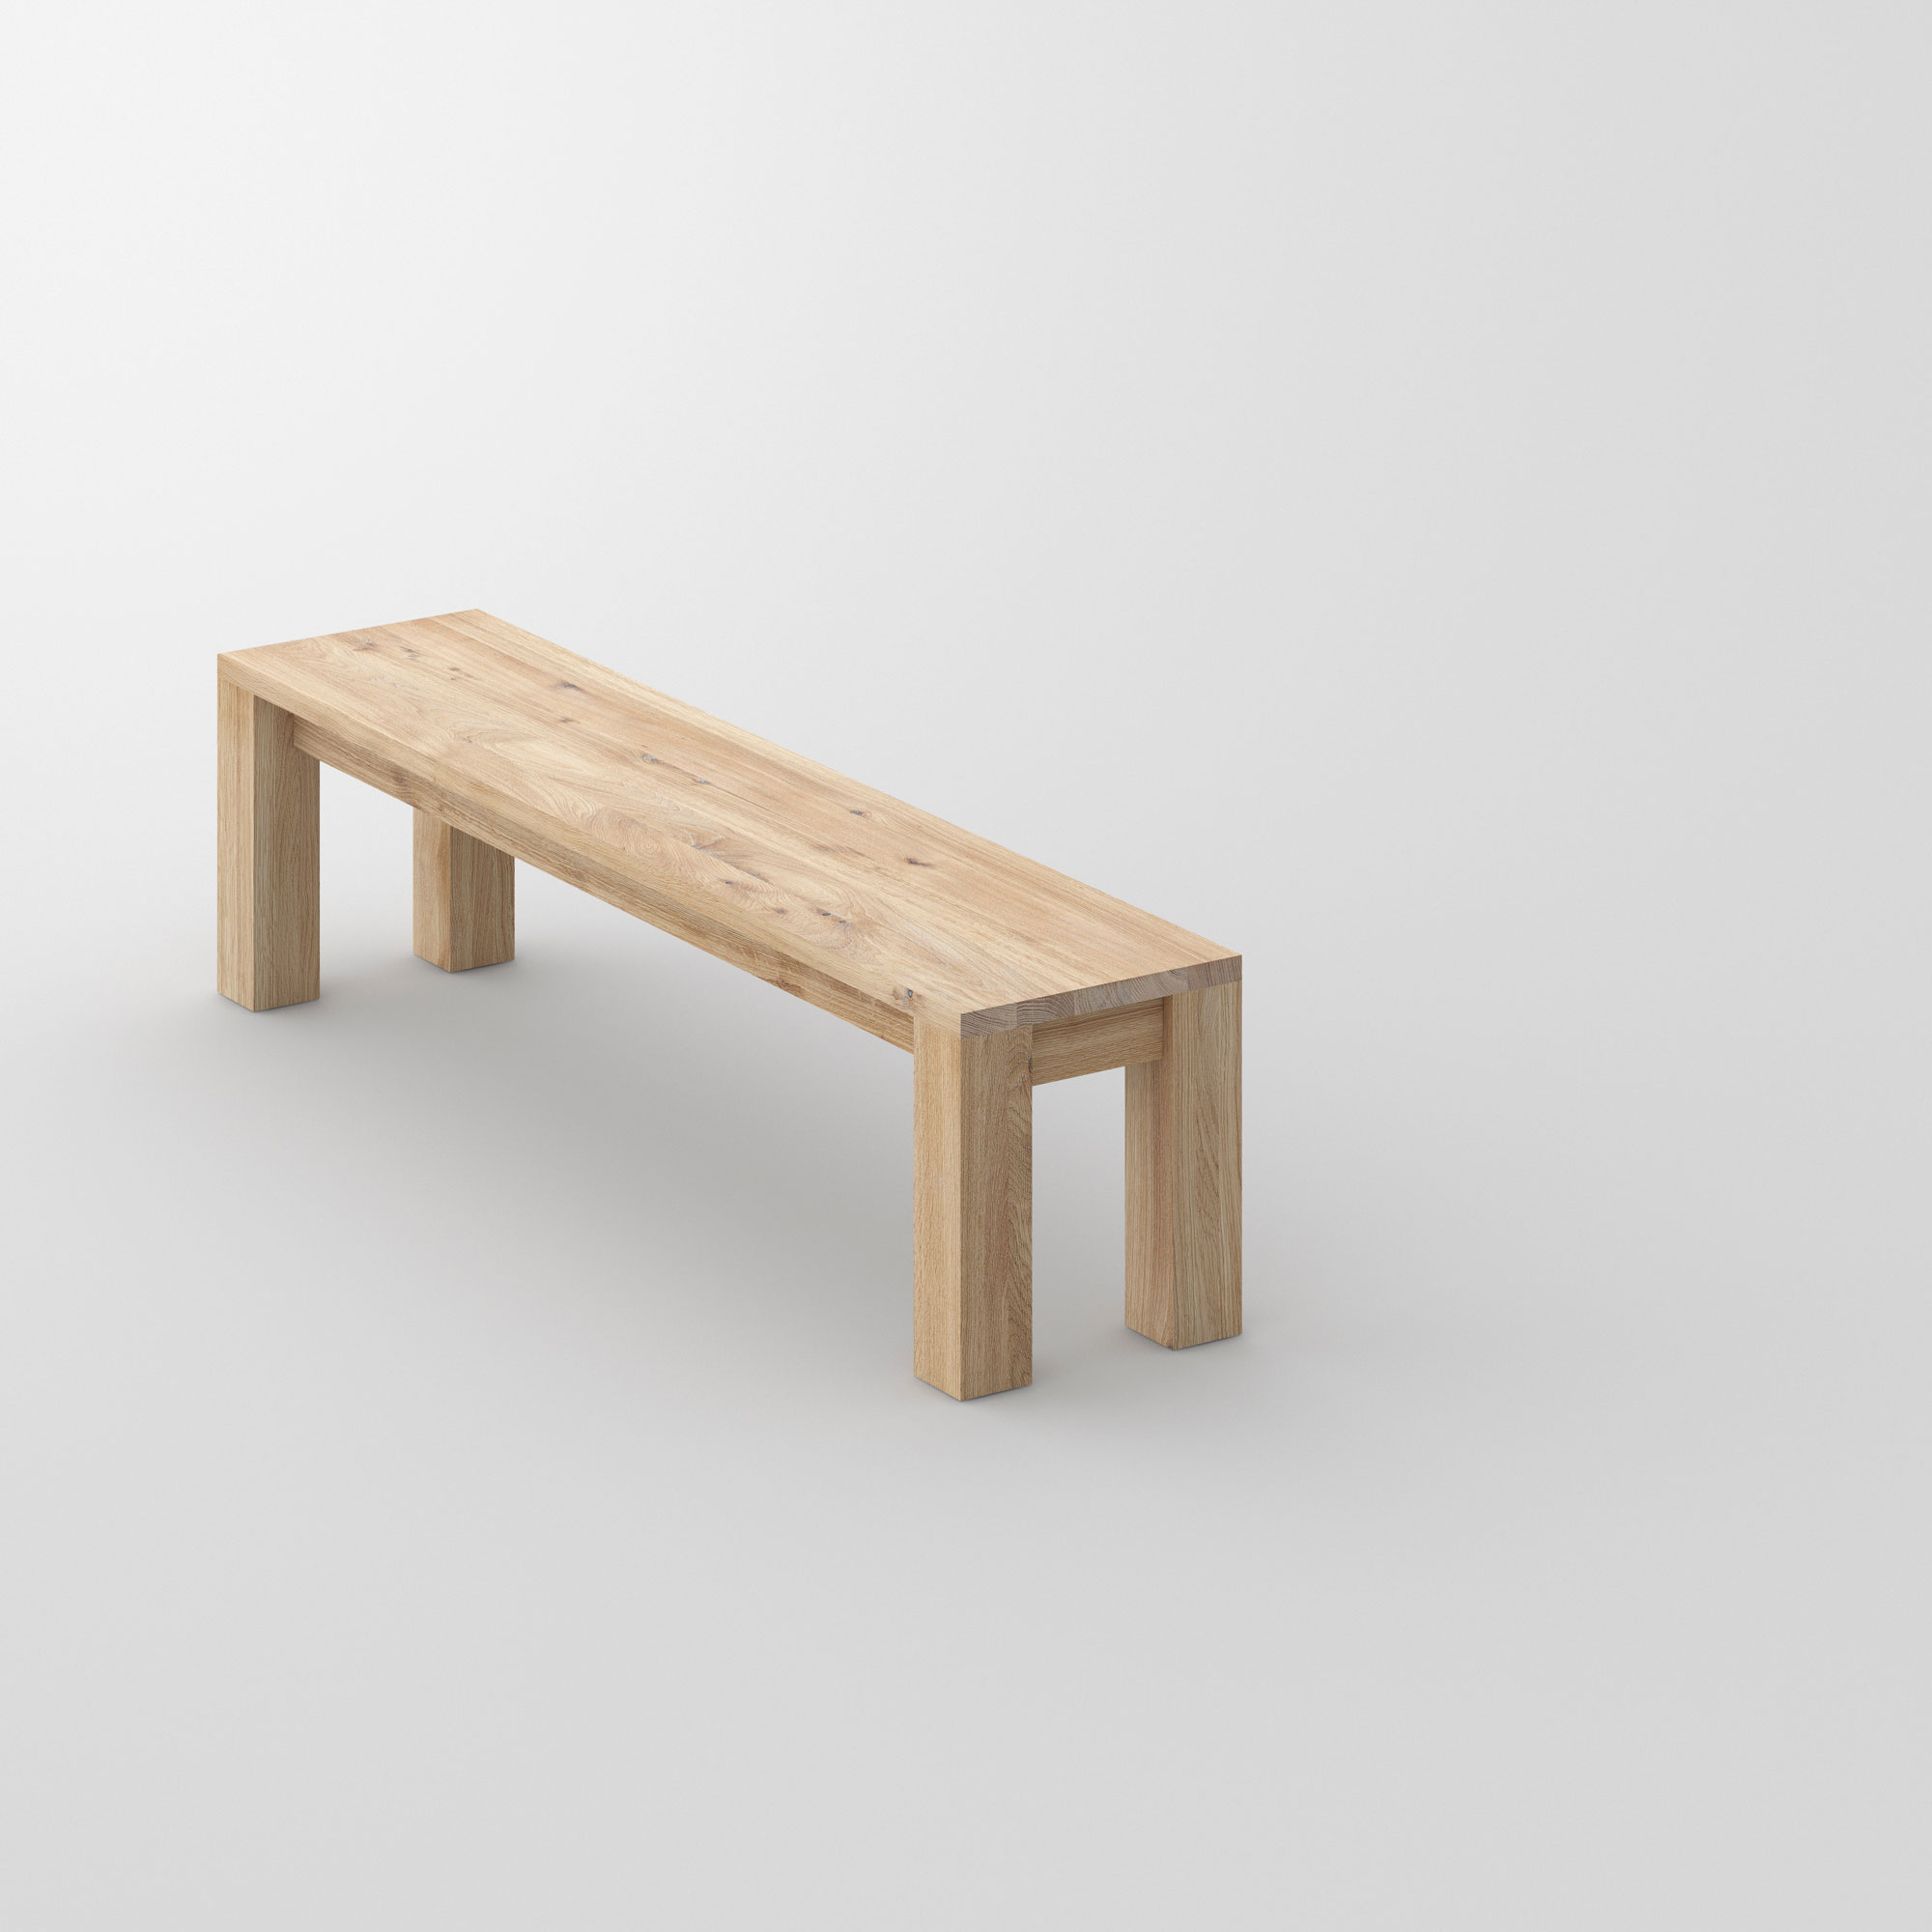 Extendable Bench CUBUS EP 3 cam1 custom made in solid wood by vitamin design